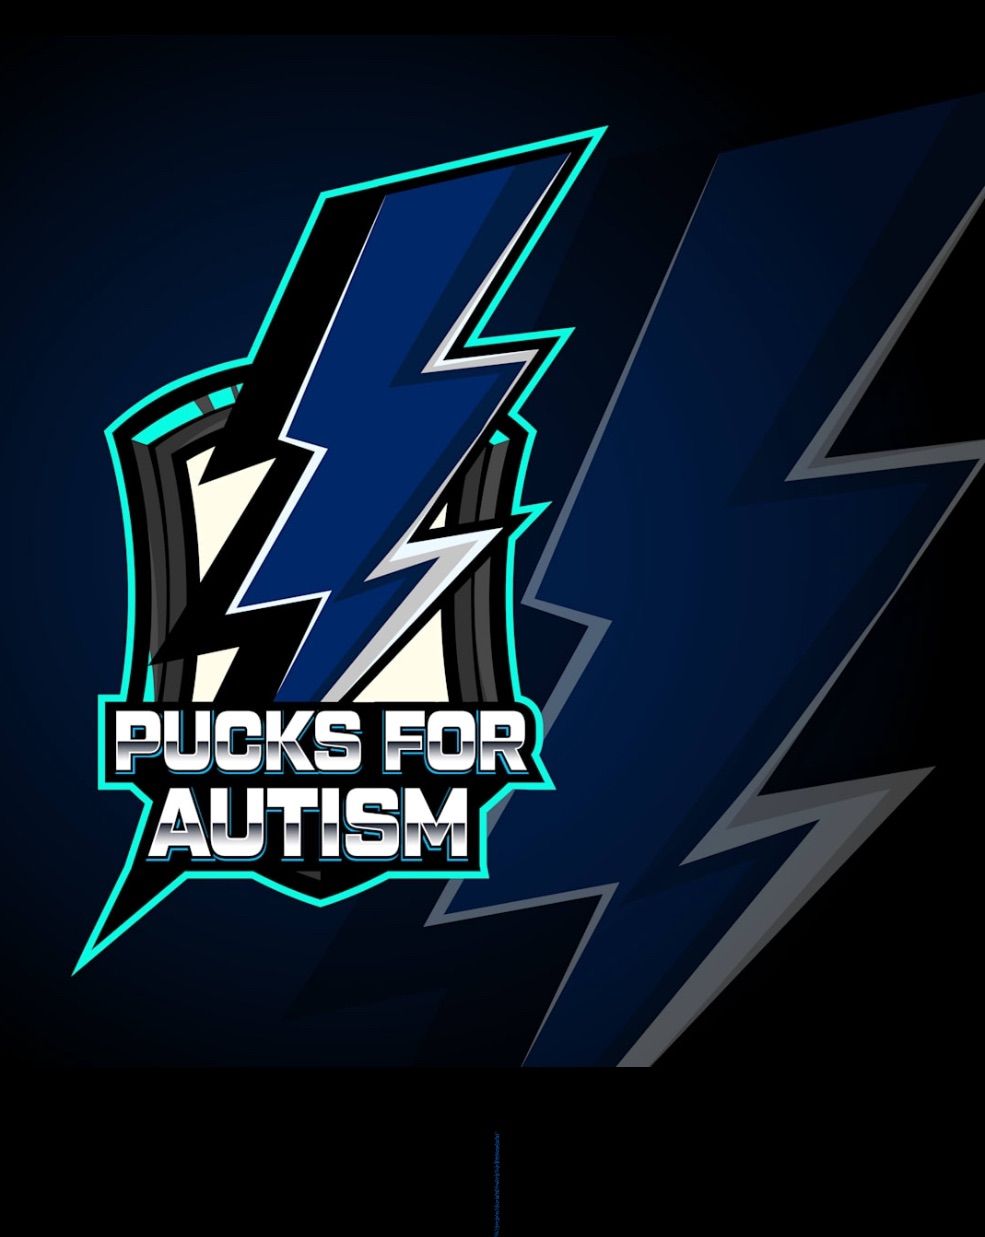 Pucks for Autism - Tampa Bay Lightning\/Amalie Arena Event (Actual Date is TBD)